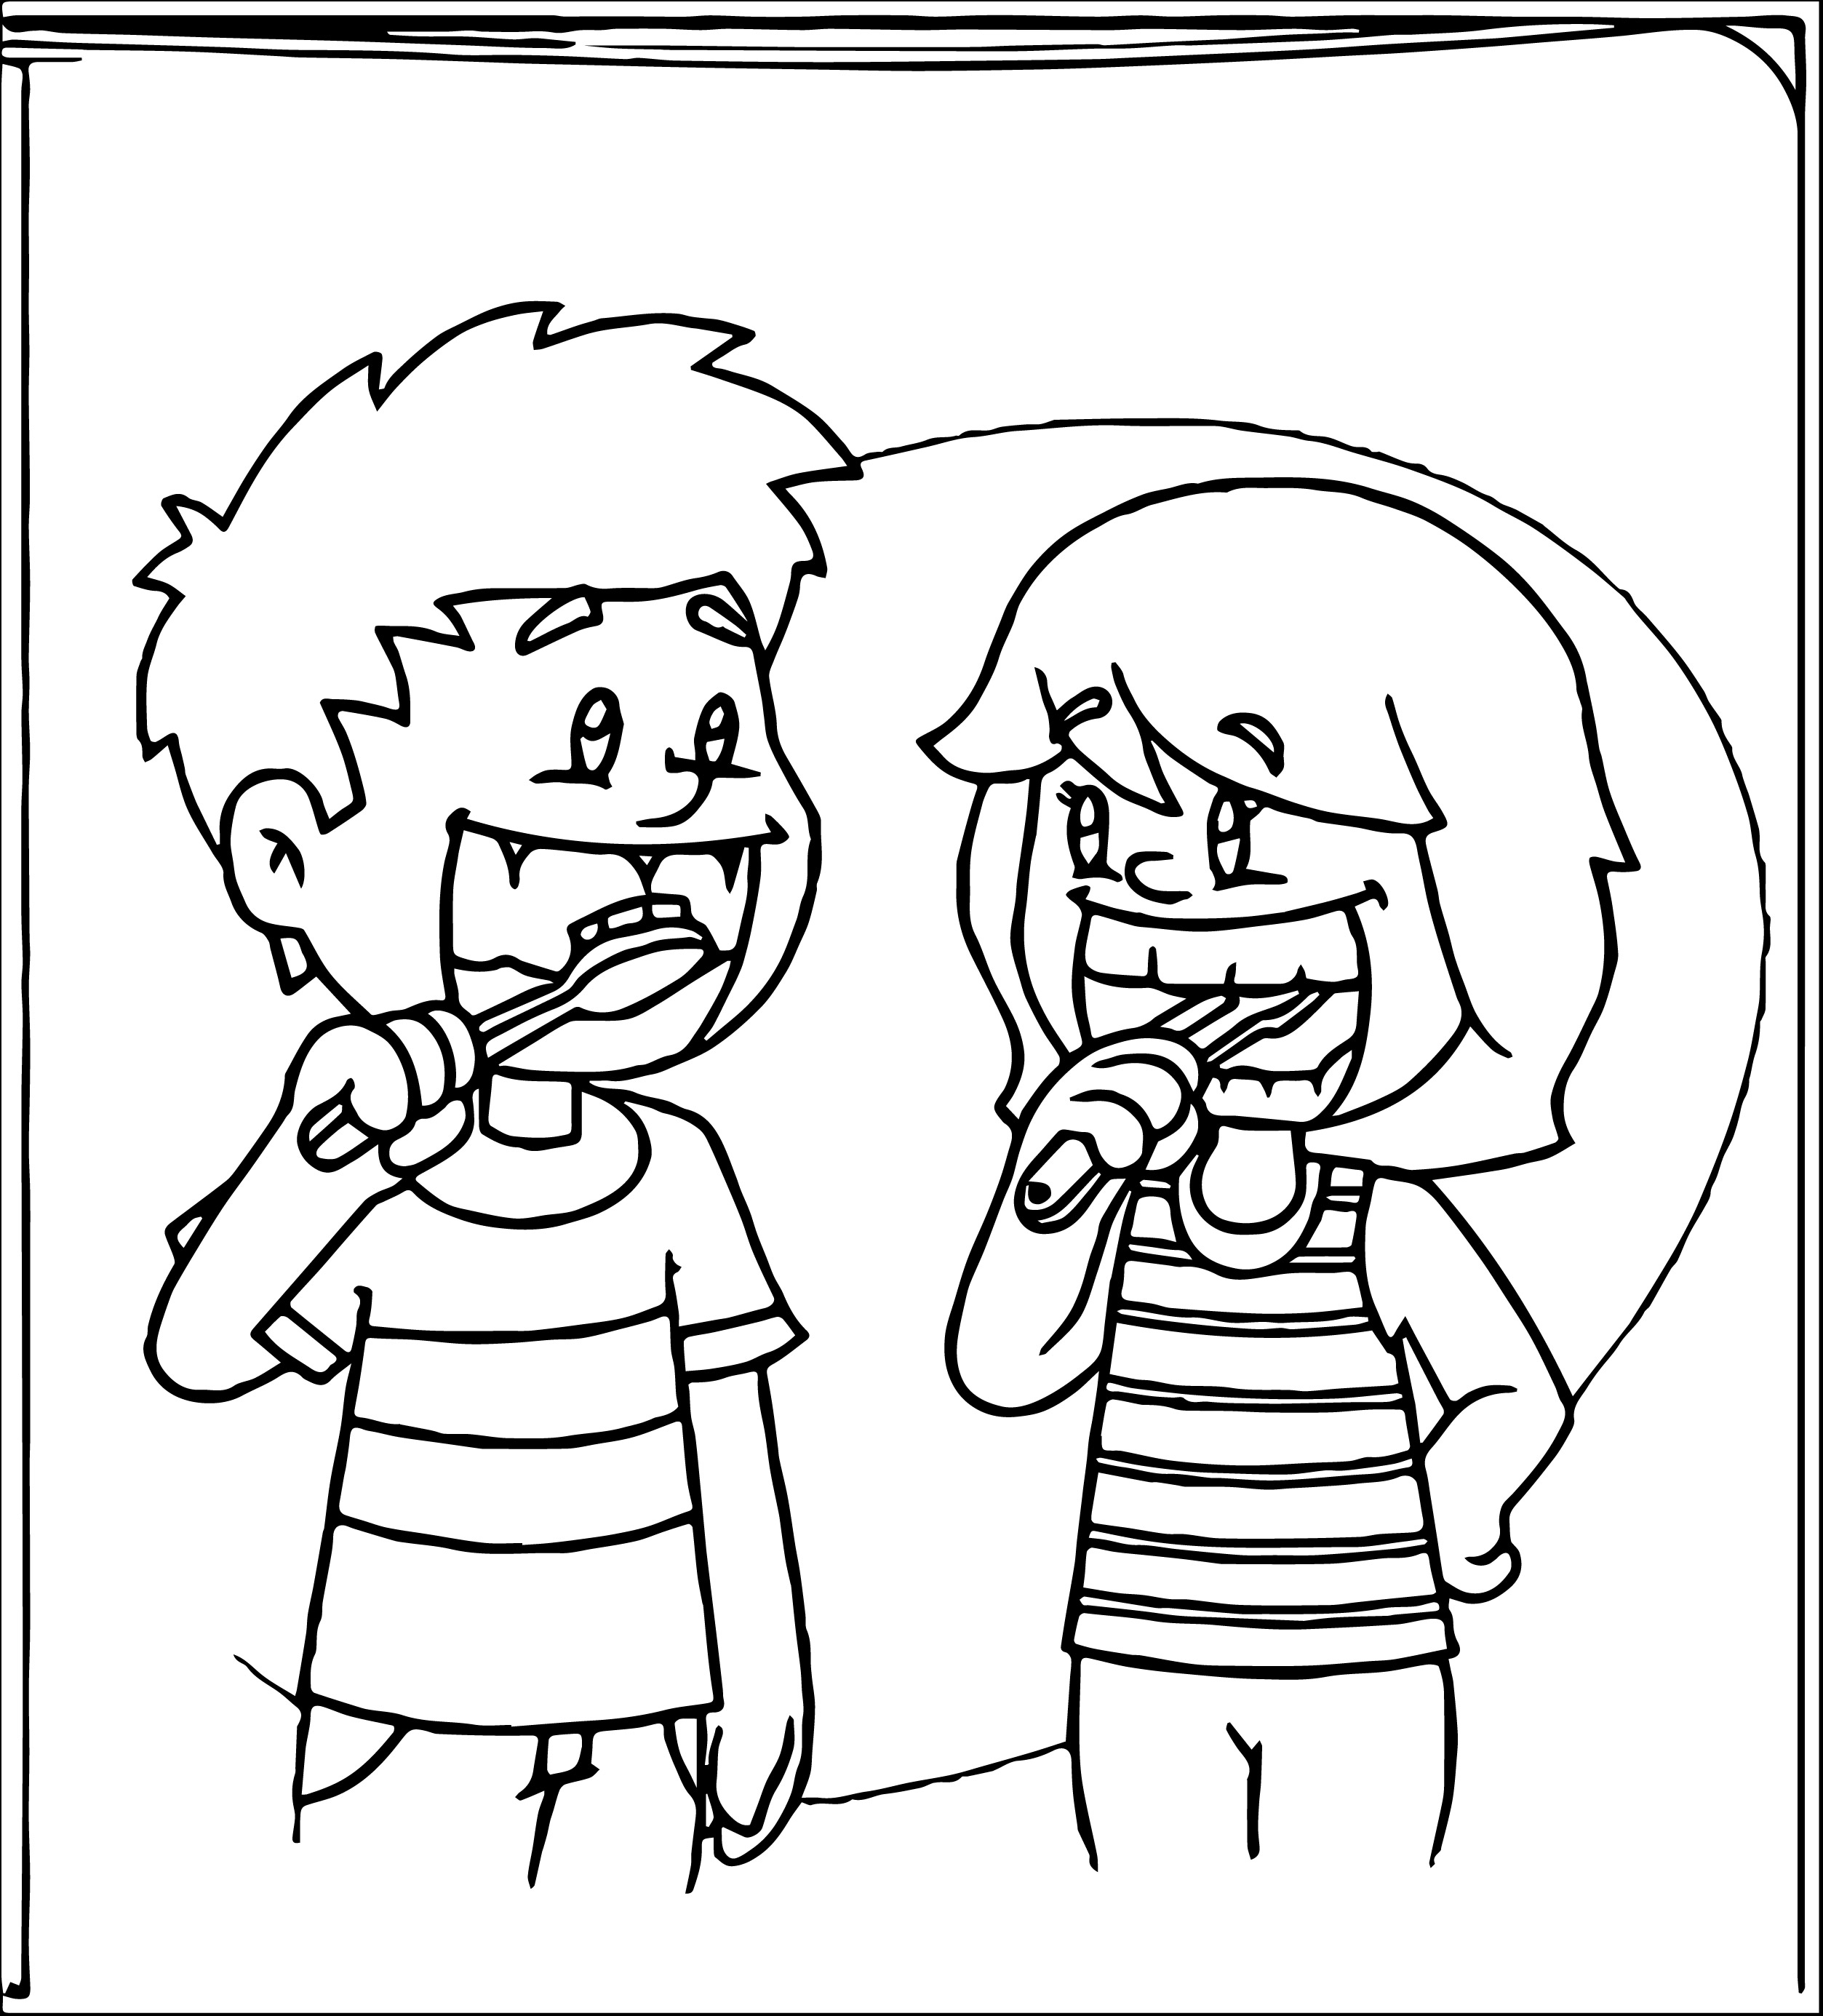 toothbrush clipart black and white - photo #50